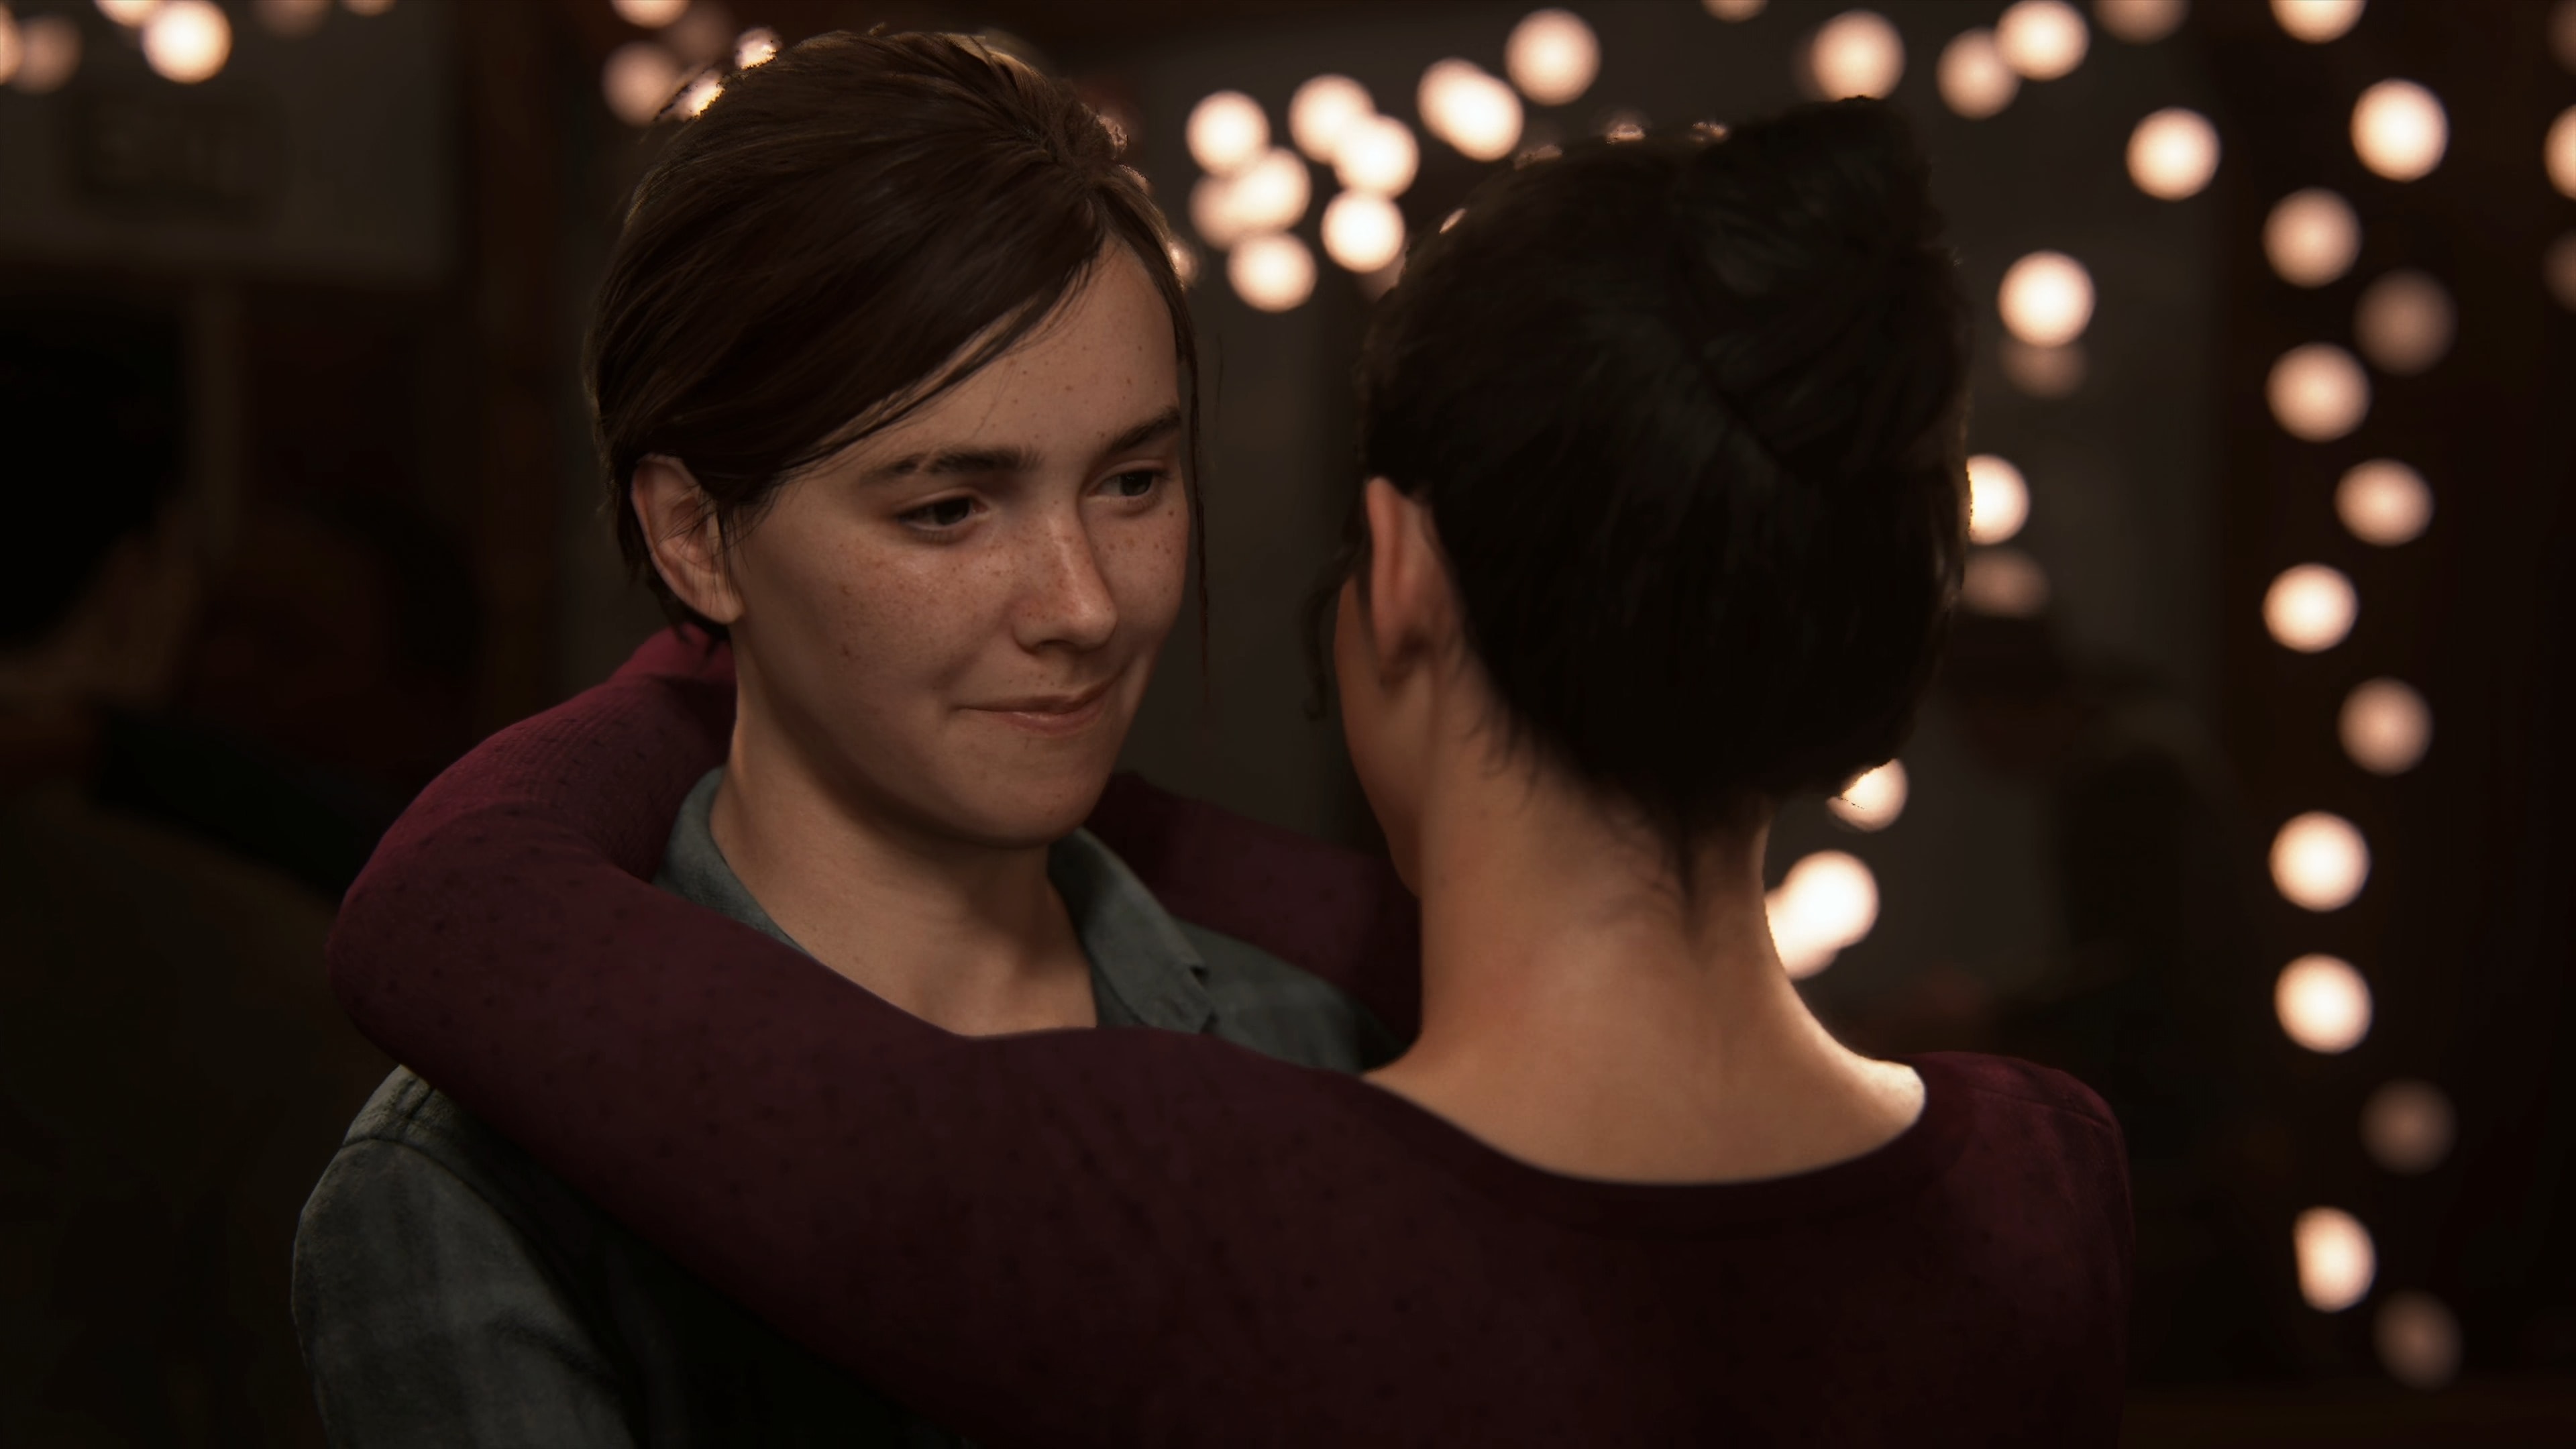 The Last Of Us 2 Release Date Trailer Is Troubling For Queer